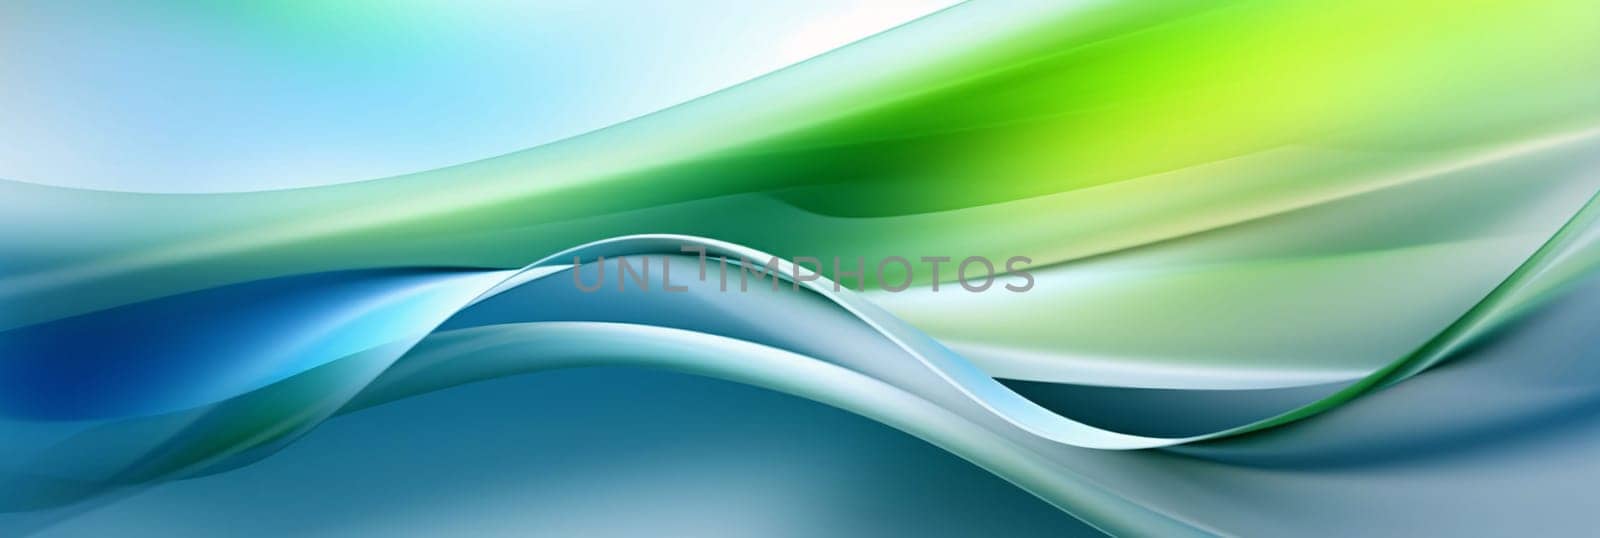 Abstract background design: Abstract background, flowing liquid style colors mixing together on light backdrop. Vector illustration